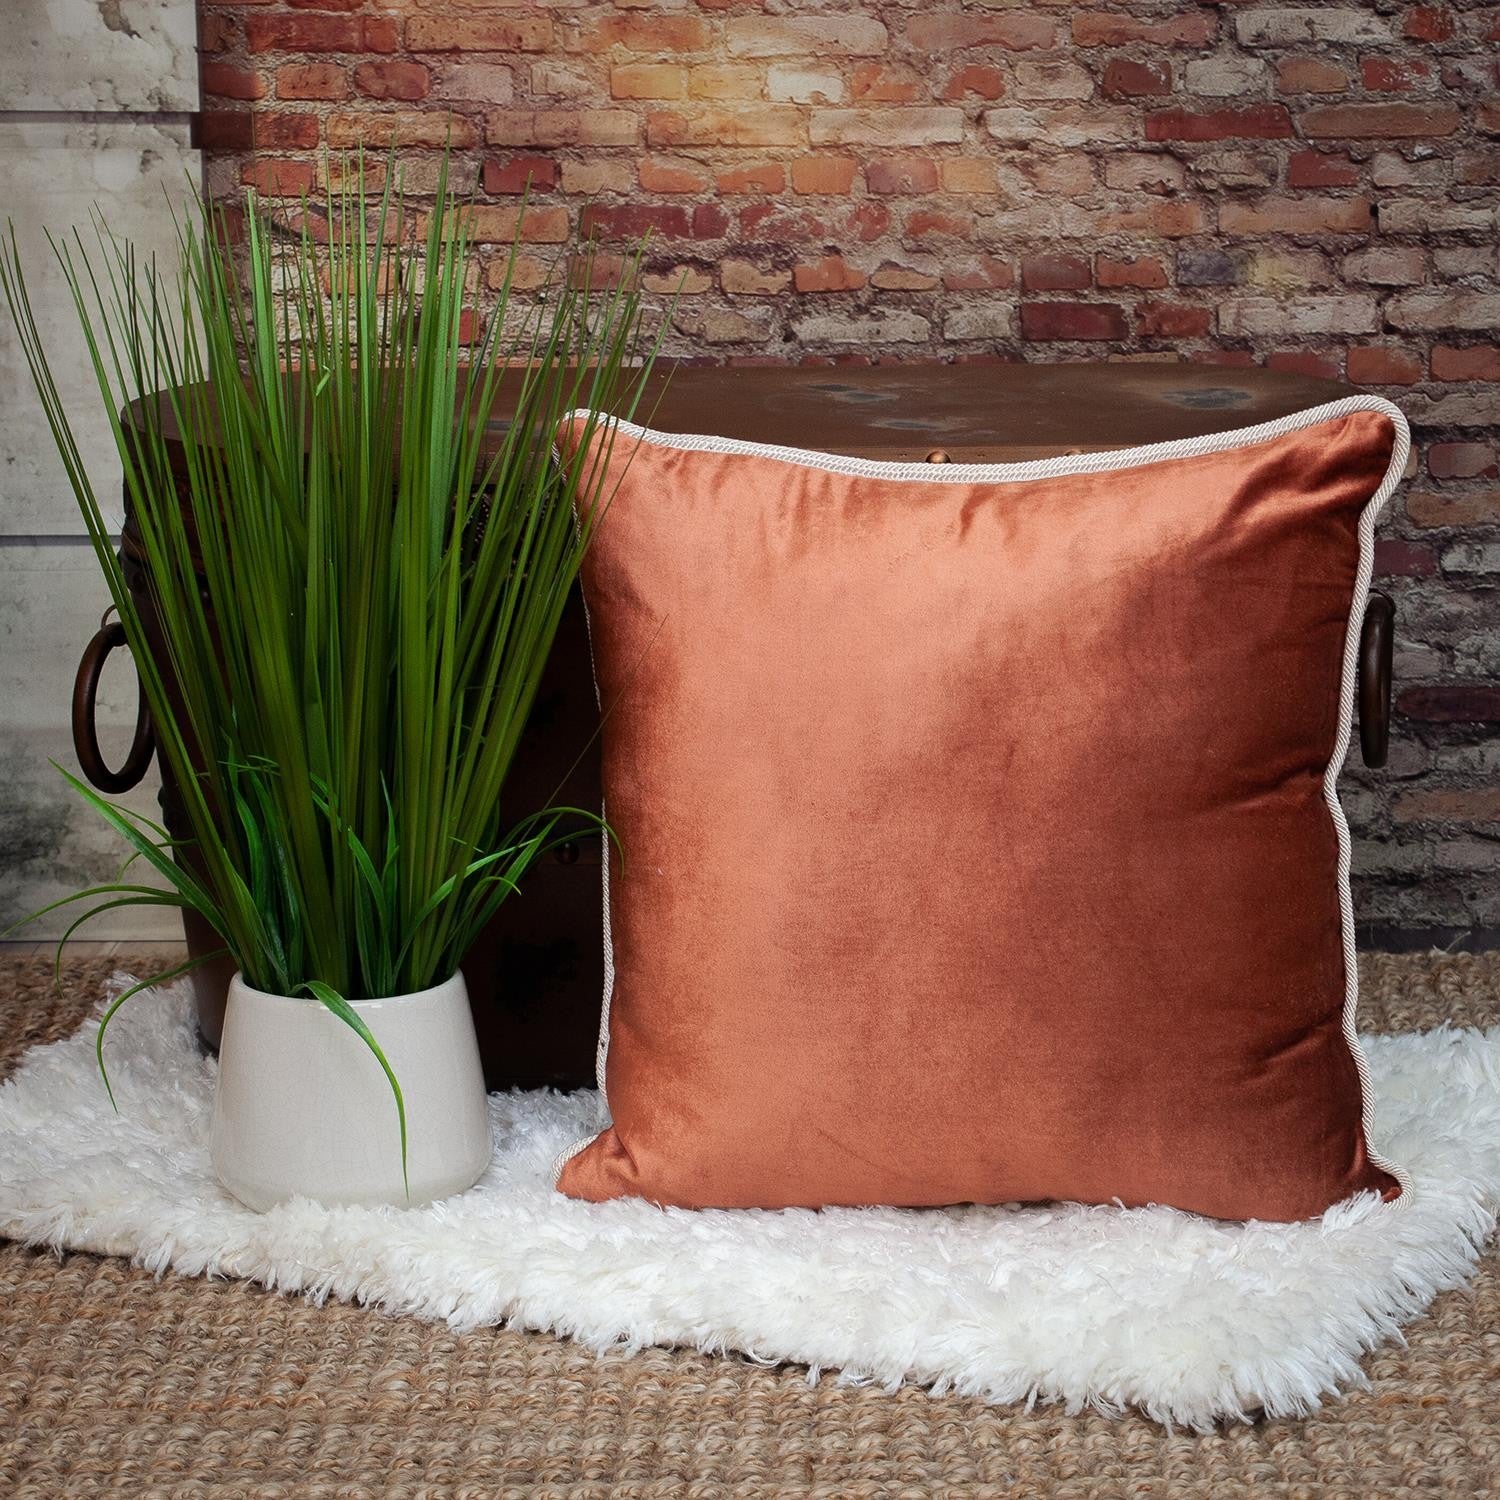 Reversible Gold and Brown Square Velvet Throw Pillow